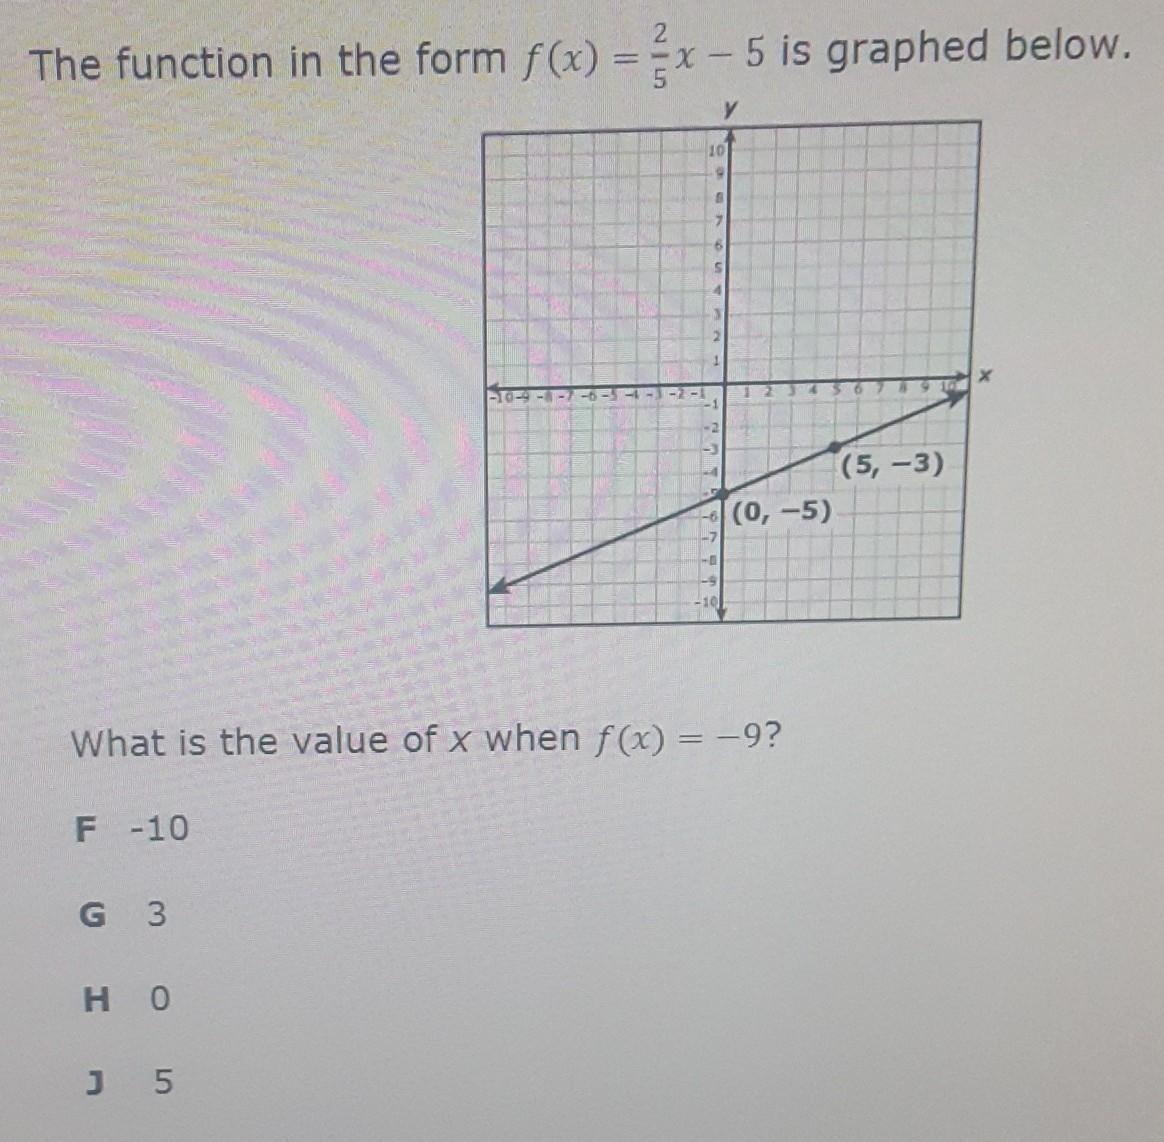 The Function In The Form F(x)=2/5x-5 Is Graphed Below. What Is The Value Of X When F(x)=-9?